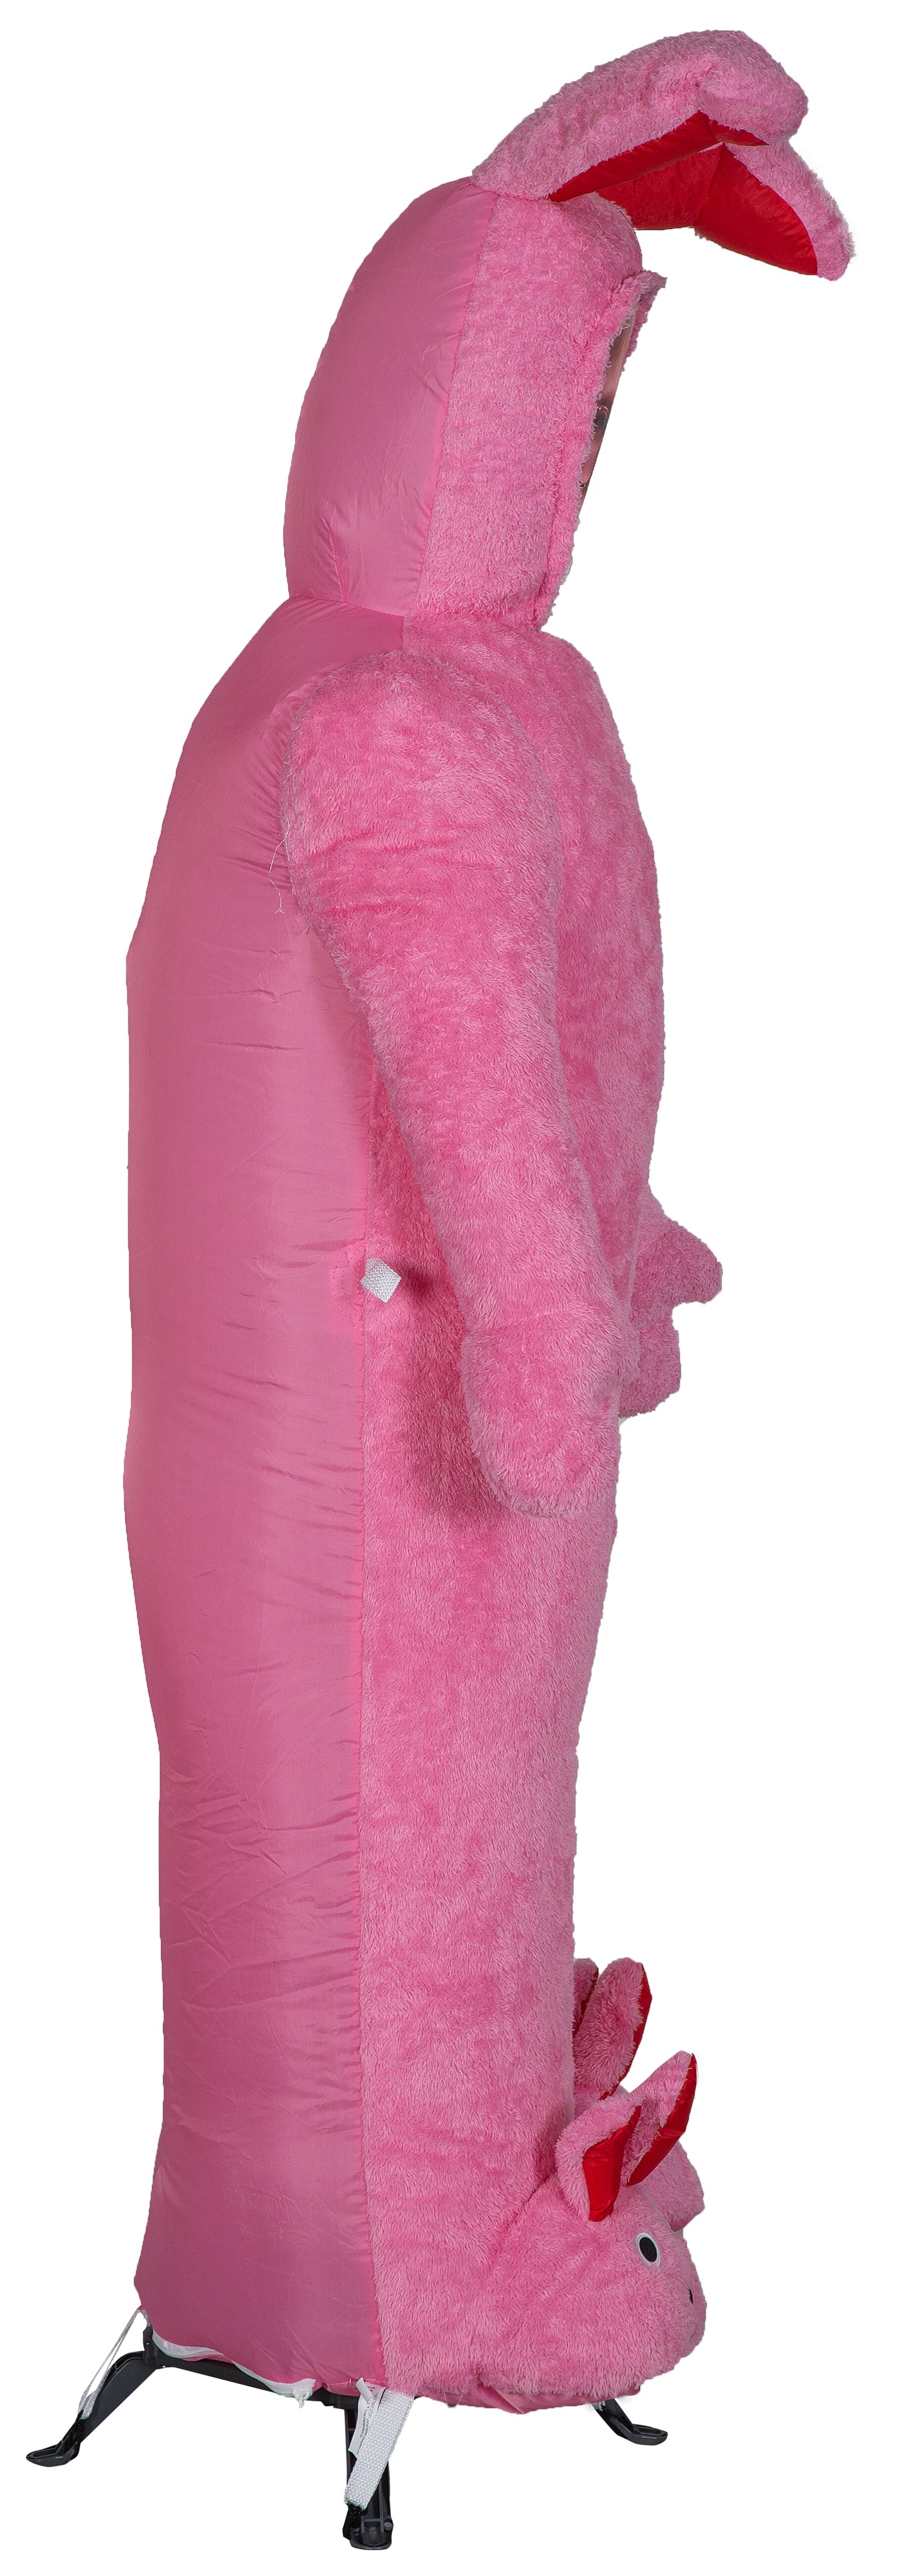 Gemmy Photorealistic Airblown Inflatable Mixed Media Ralphie w/Pink FuzzyPlush Bunny Suit WB, 6 ft Tall